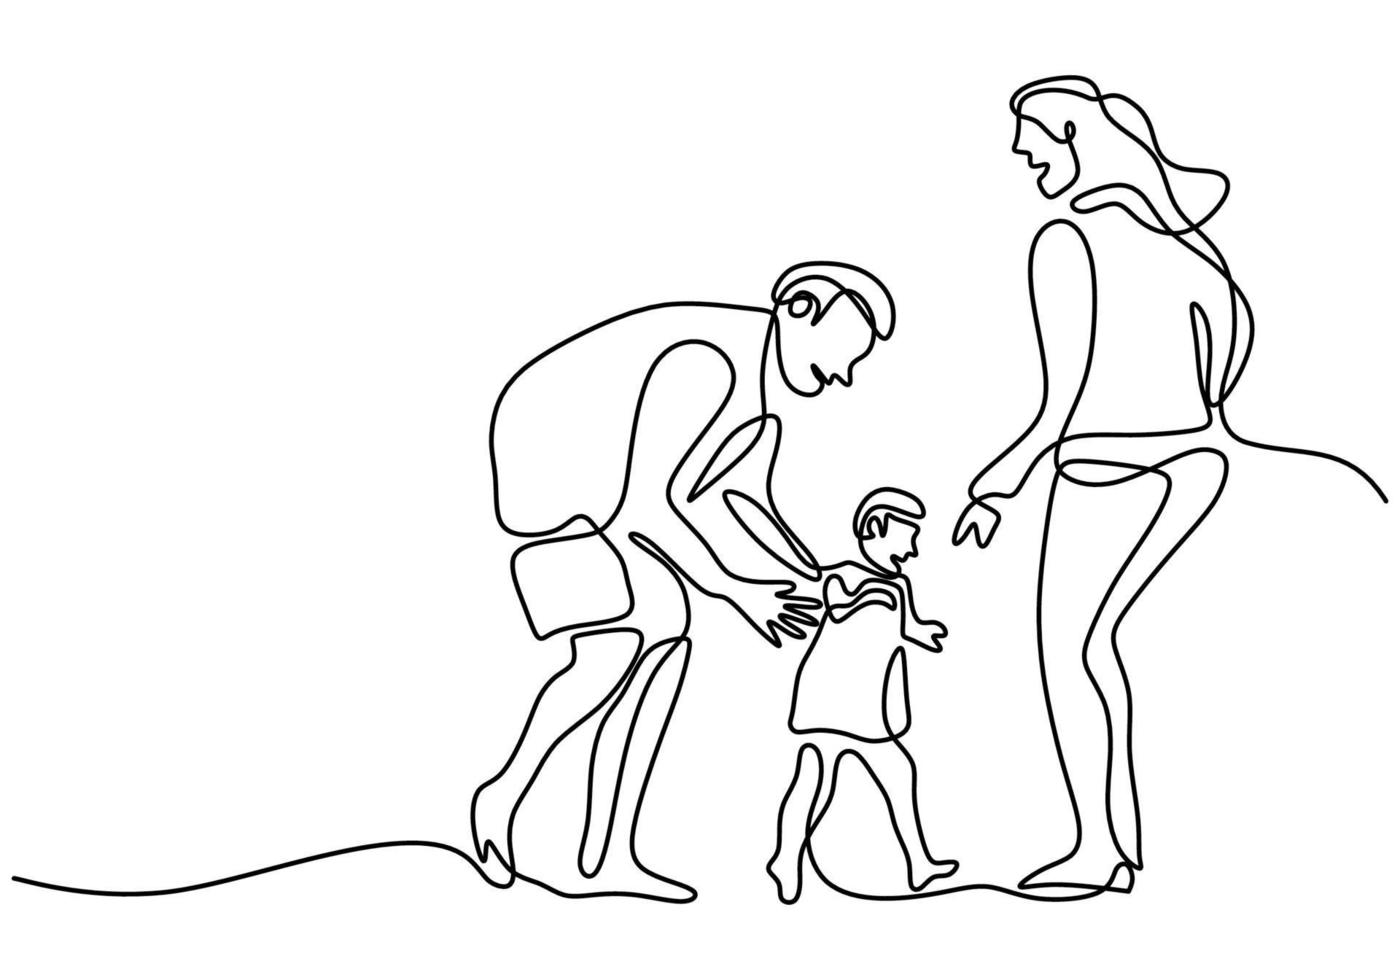 Continuous one line drawing of happy family father, mother and their child playing together at home field isolated on white background. Happy family parenting concept. Vector illustration